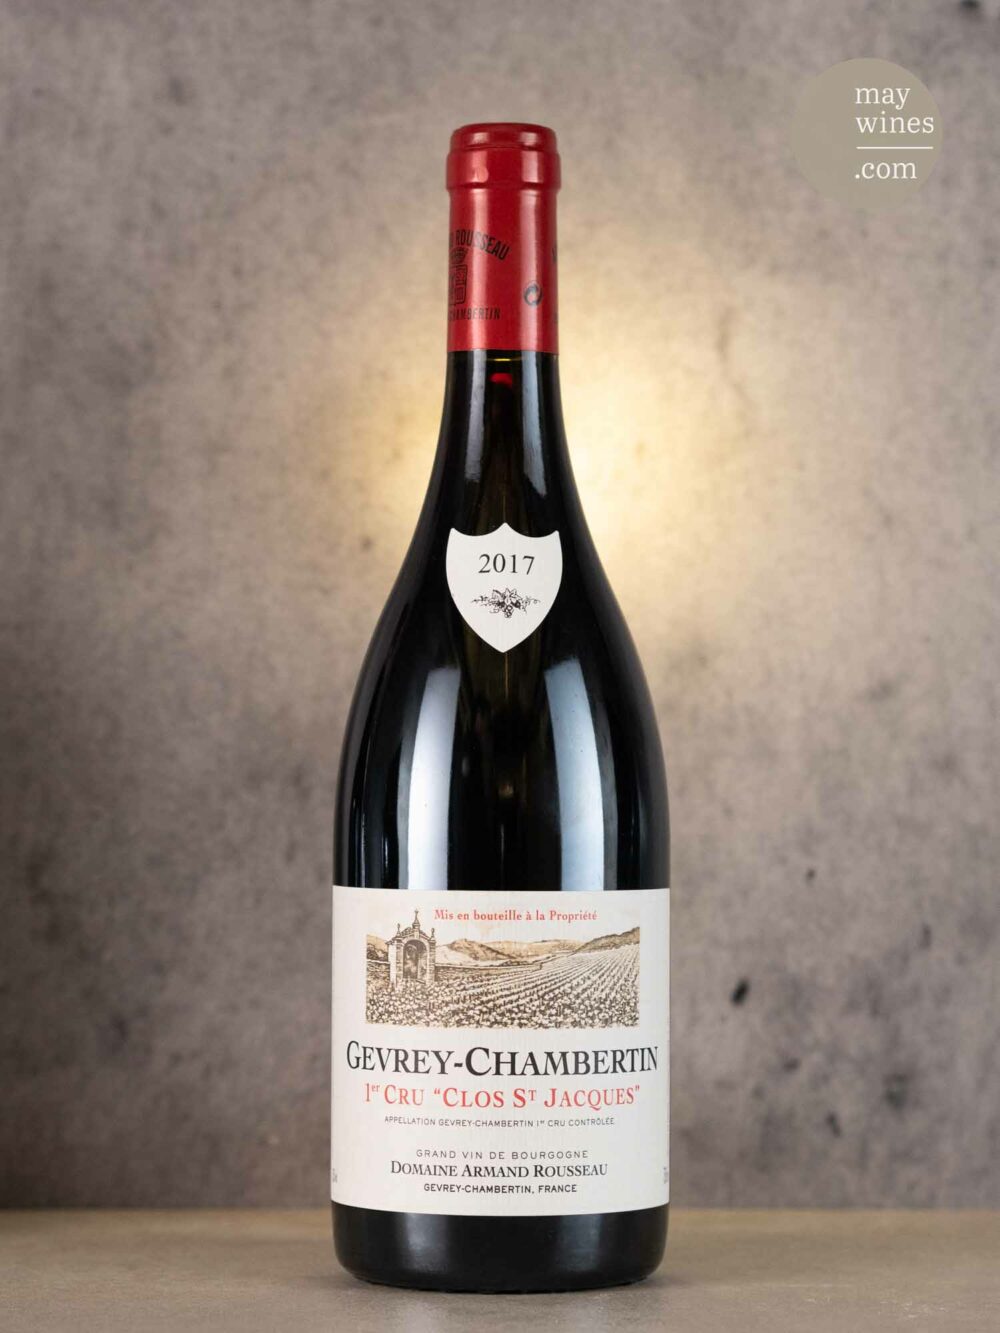 May Wines – Rotwein – 2017 Gevrey-Chambertin Clos St. Jacques Premier Cru - Domaine Armand Rousseau